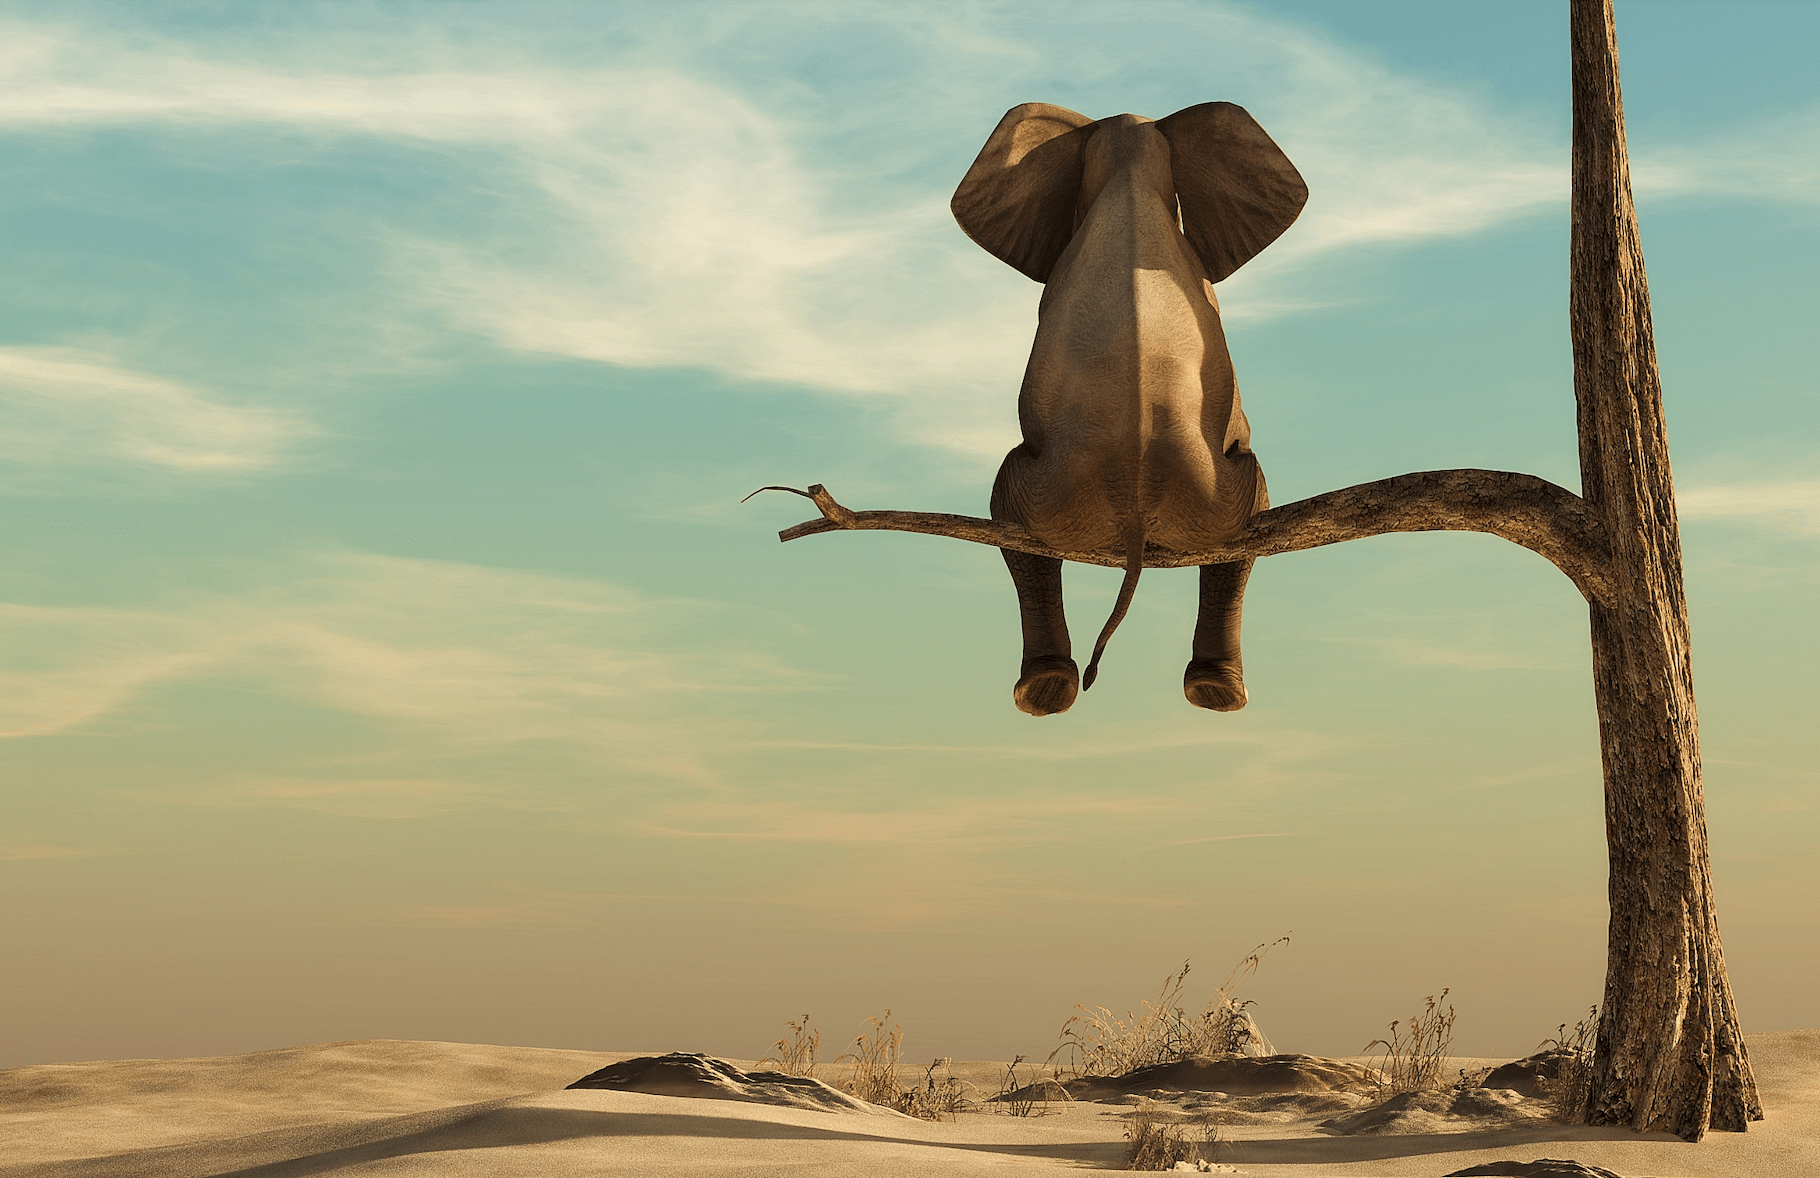 Cartoon elephant sitting on thin branch of withered tree in surreal landscape